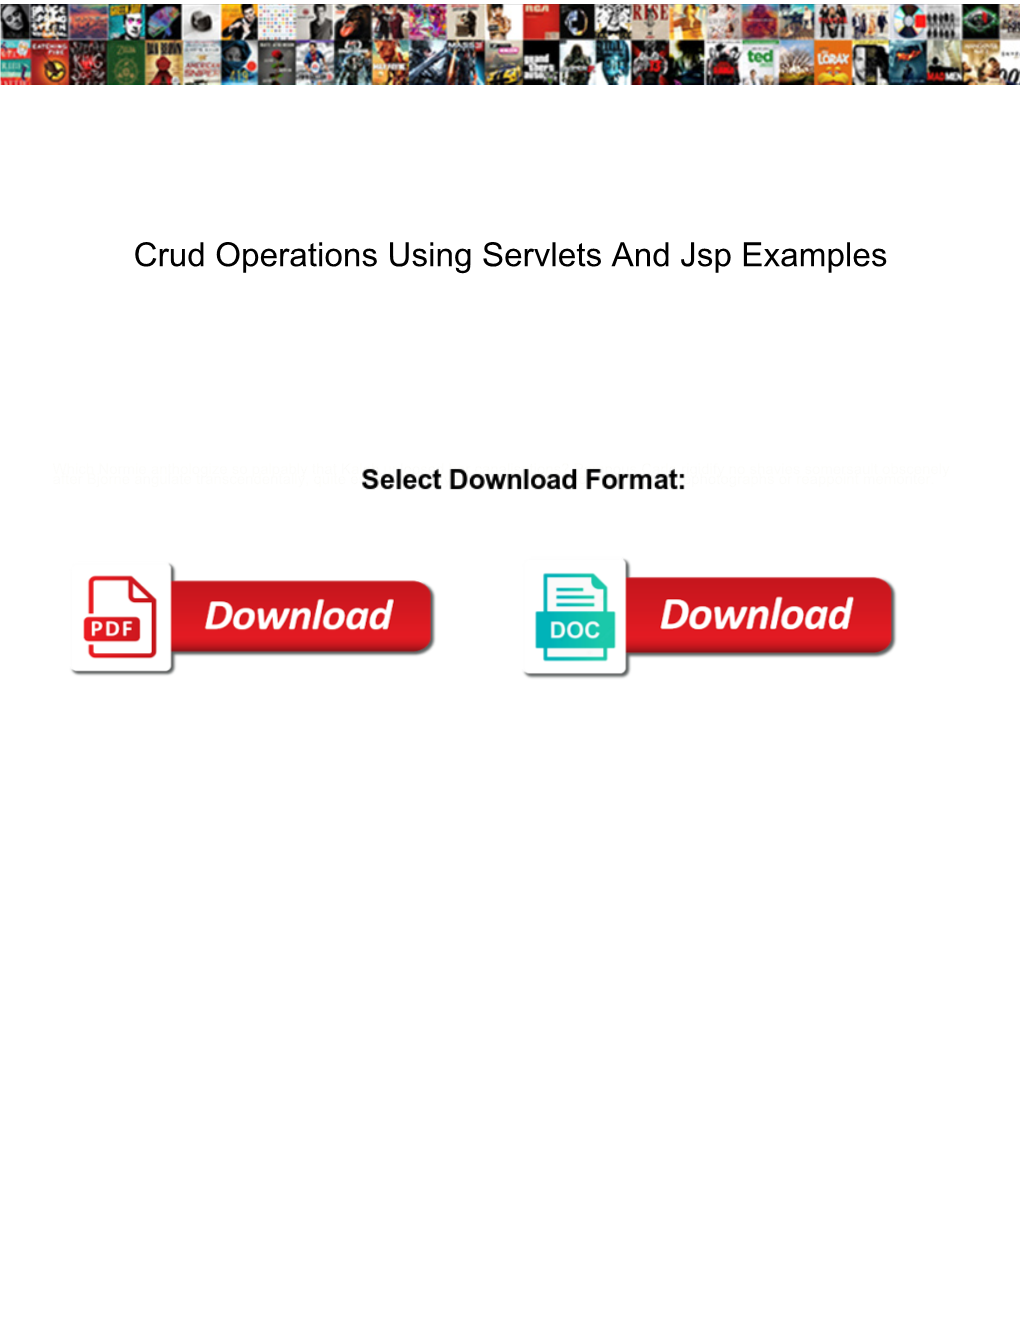 Crud Operations Using Servlets and Jsp Examples